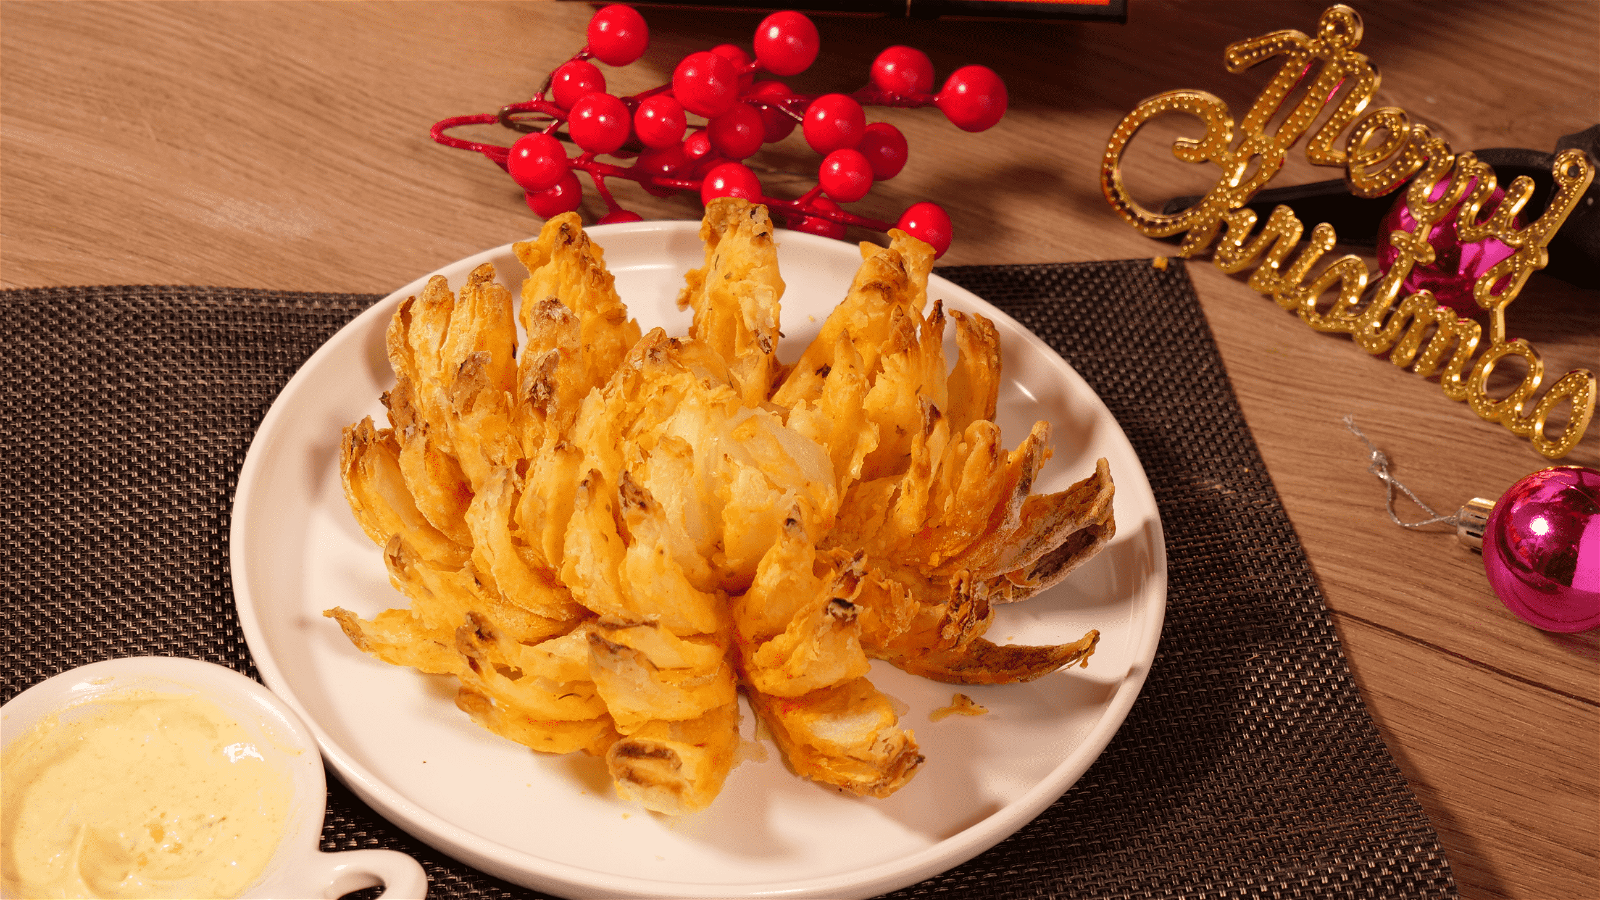 Image of Blooming Onion in an Air fryer